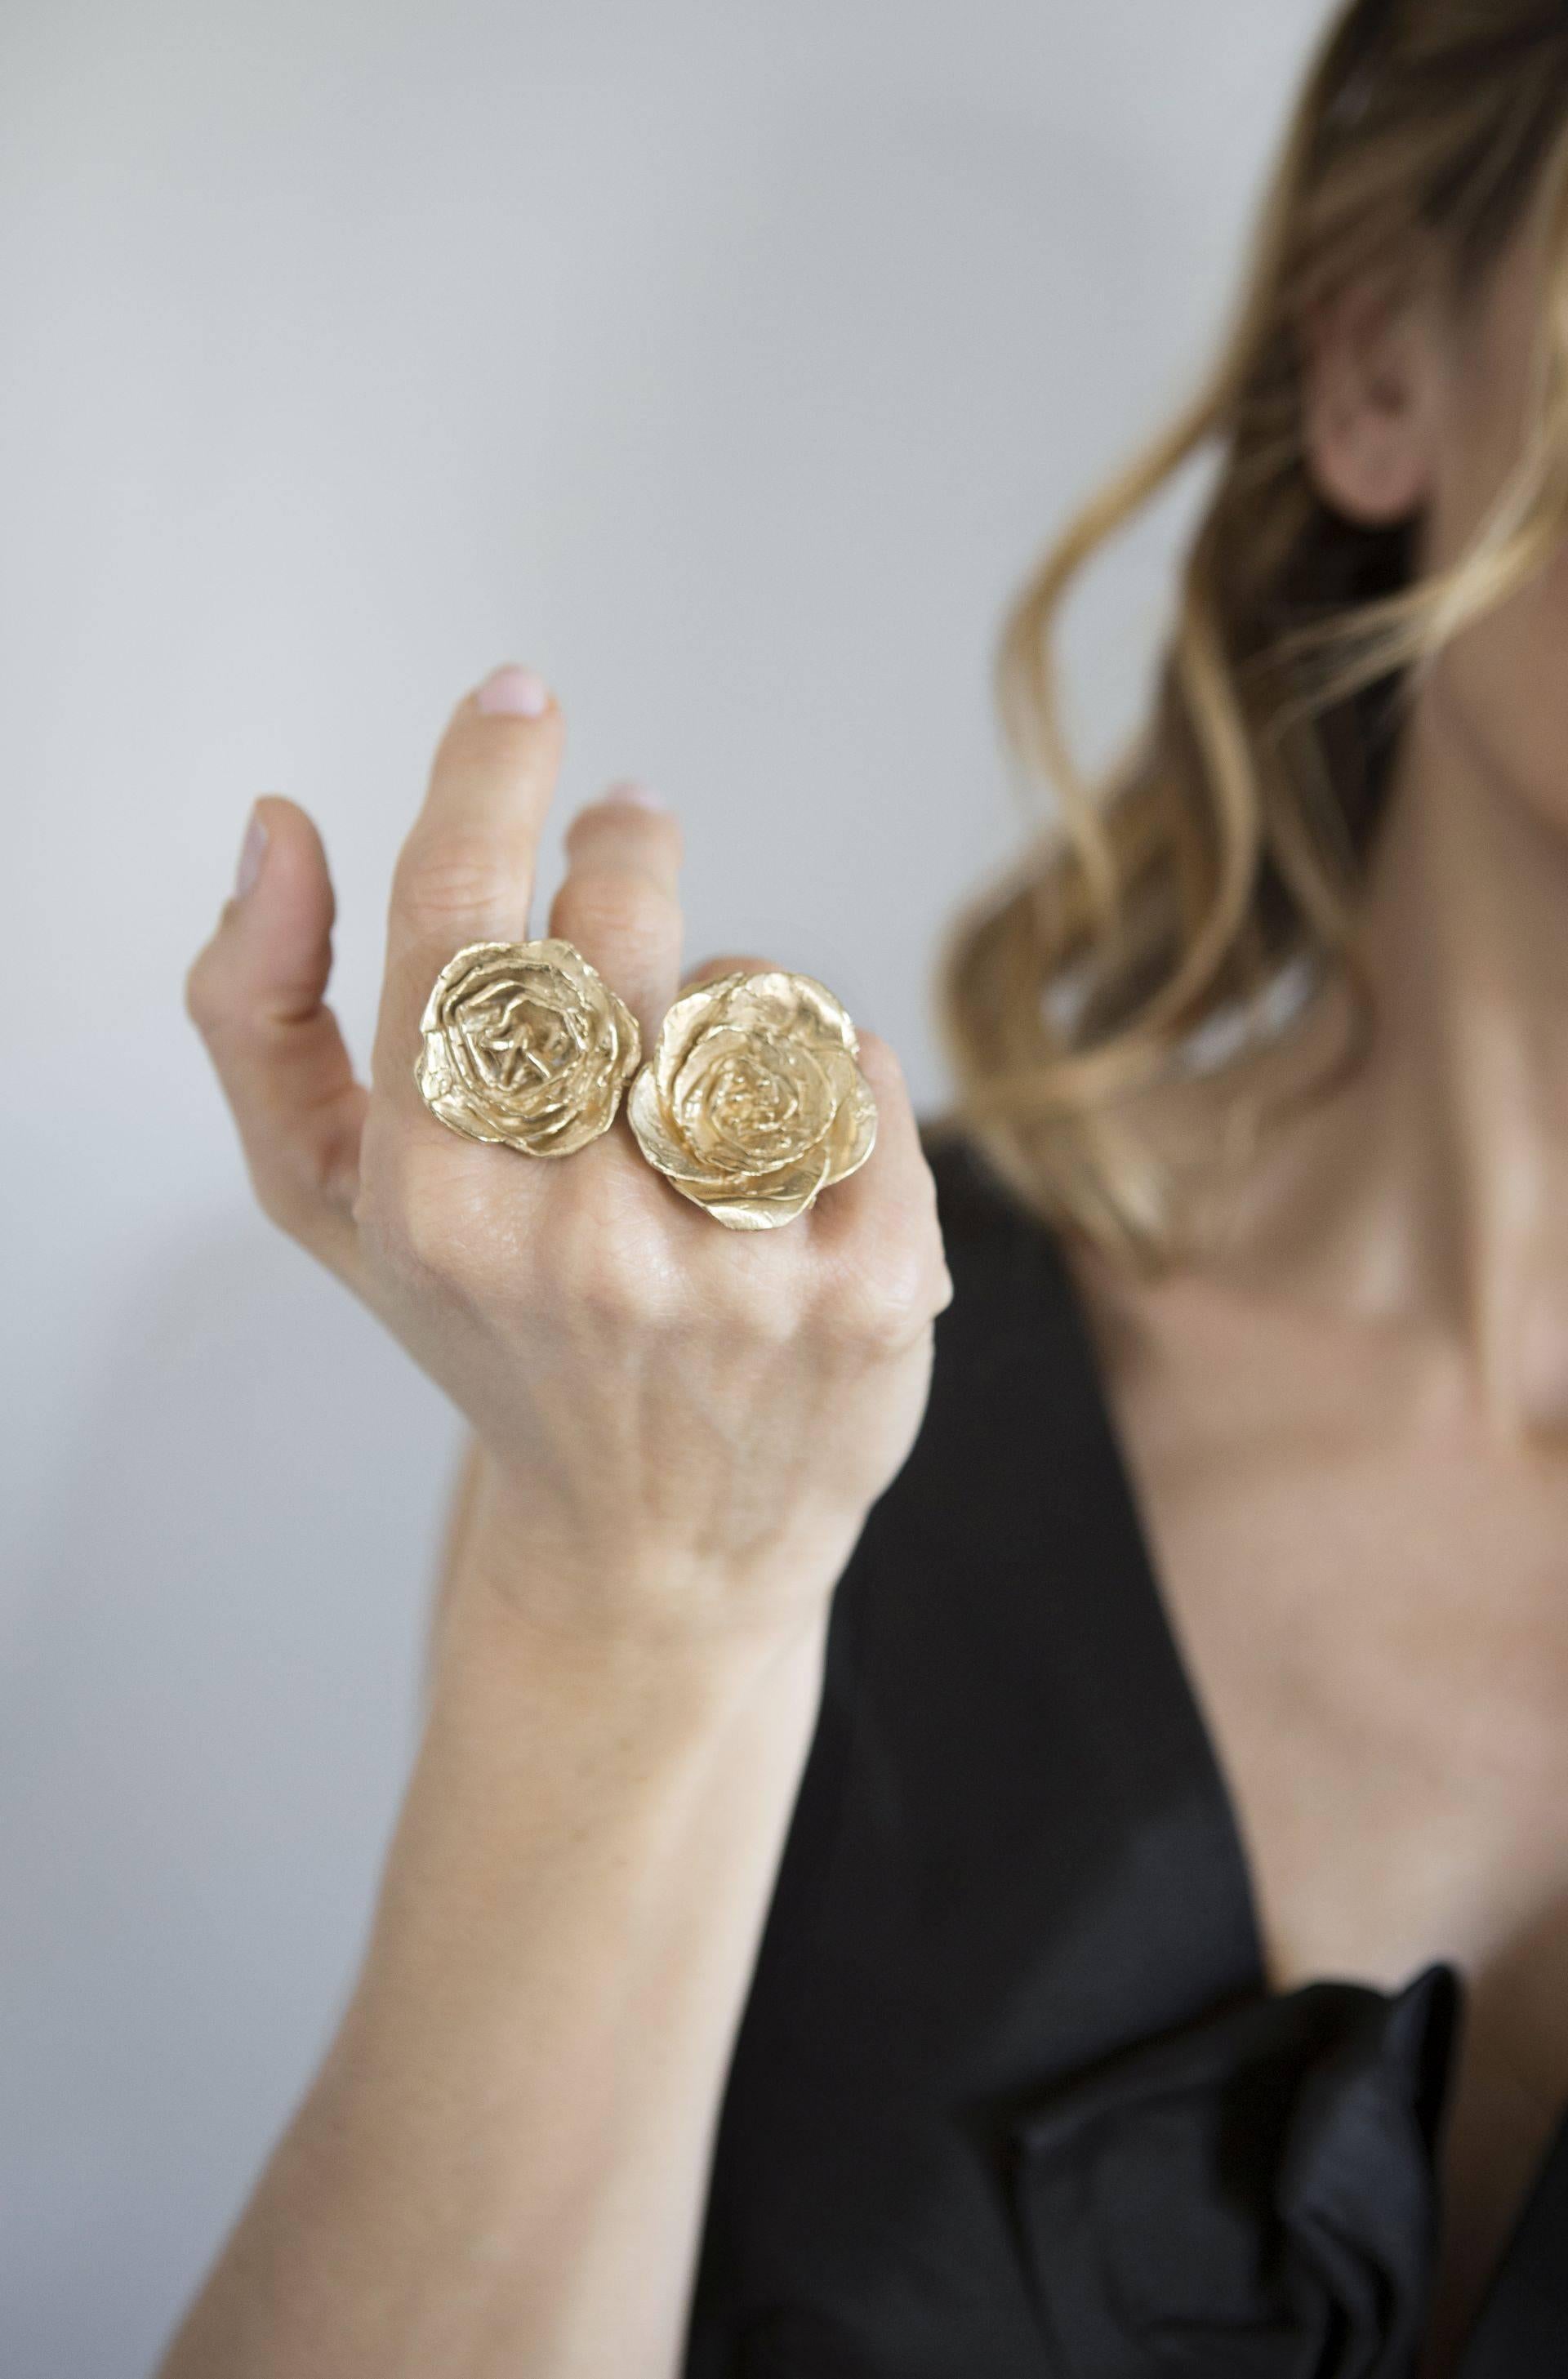 Giulia Barela's Cameliae ring is handmade and dipped in 24k gold plated bronze.

Completely inspired by nature, in particularly light this jewel is brought to life. Giulia Barela jewels are characterized, stylistically, from strong sculptural